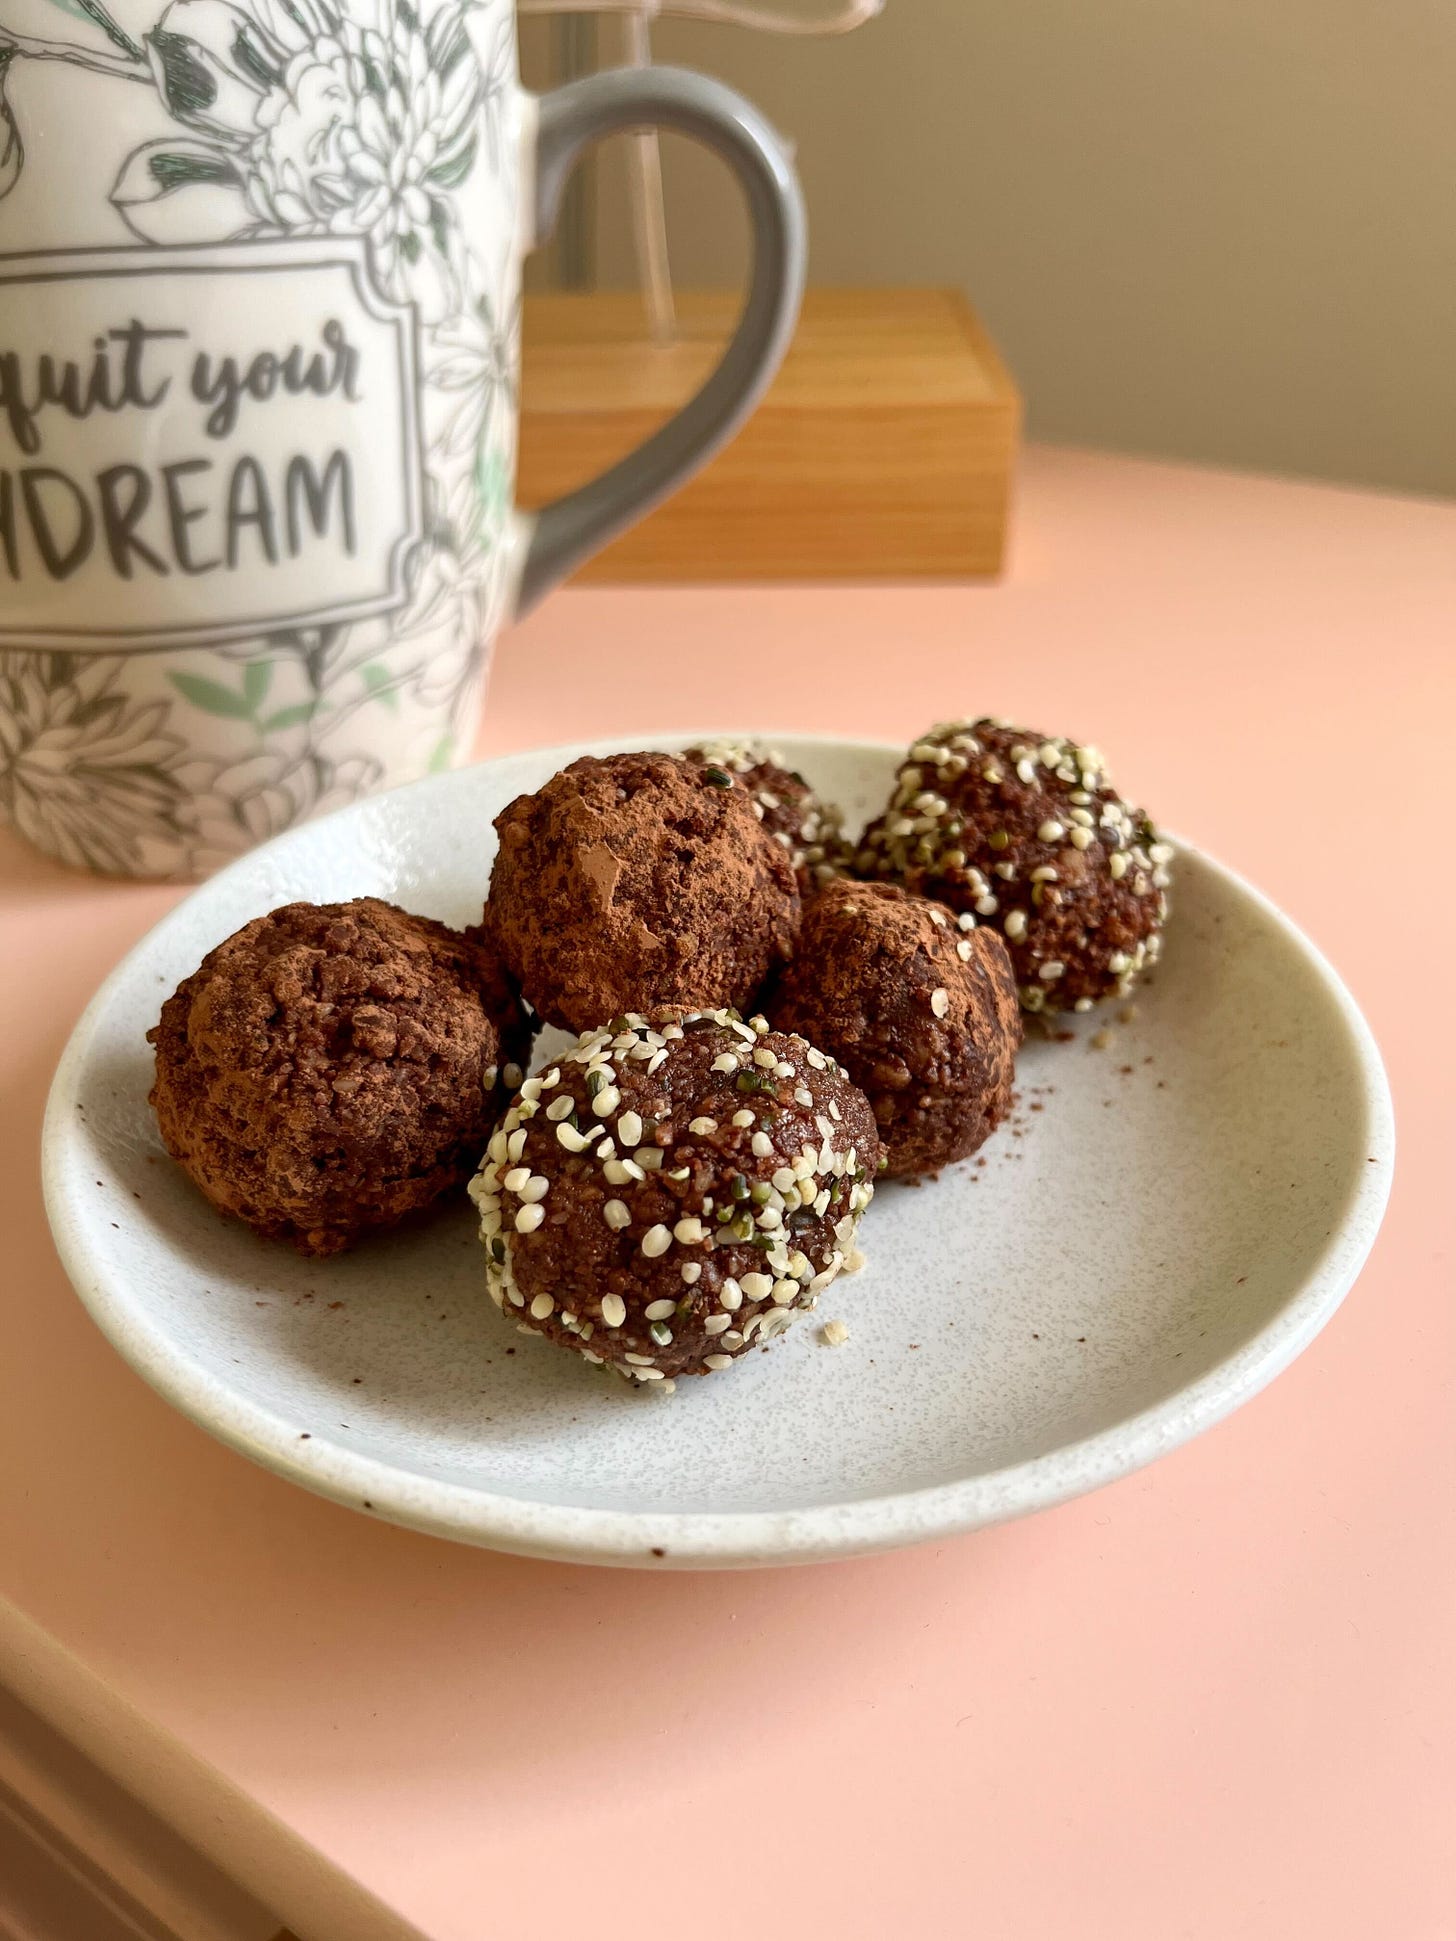 chocolate truffles dusted with cocoa powder and hemp seeds